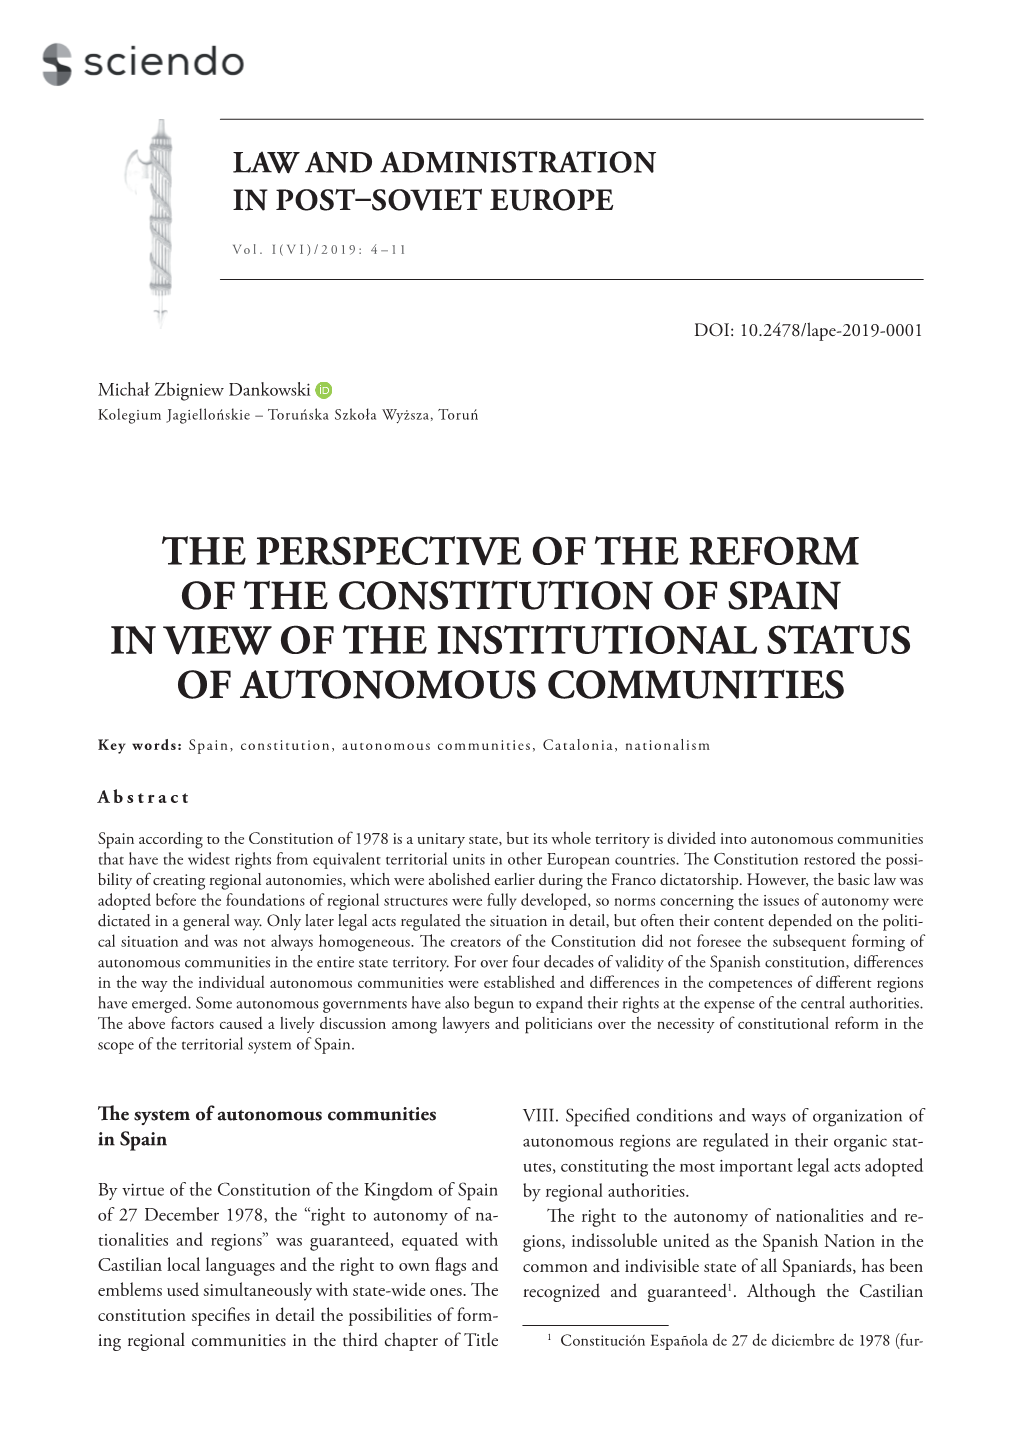 The Perspective of the Reform of the Constitution of Spain in View of the Institutional Status of Autonomous Communities